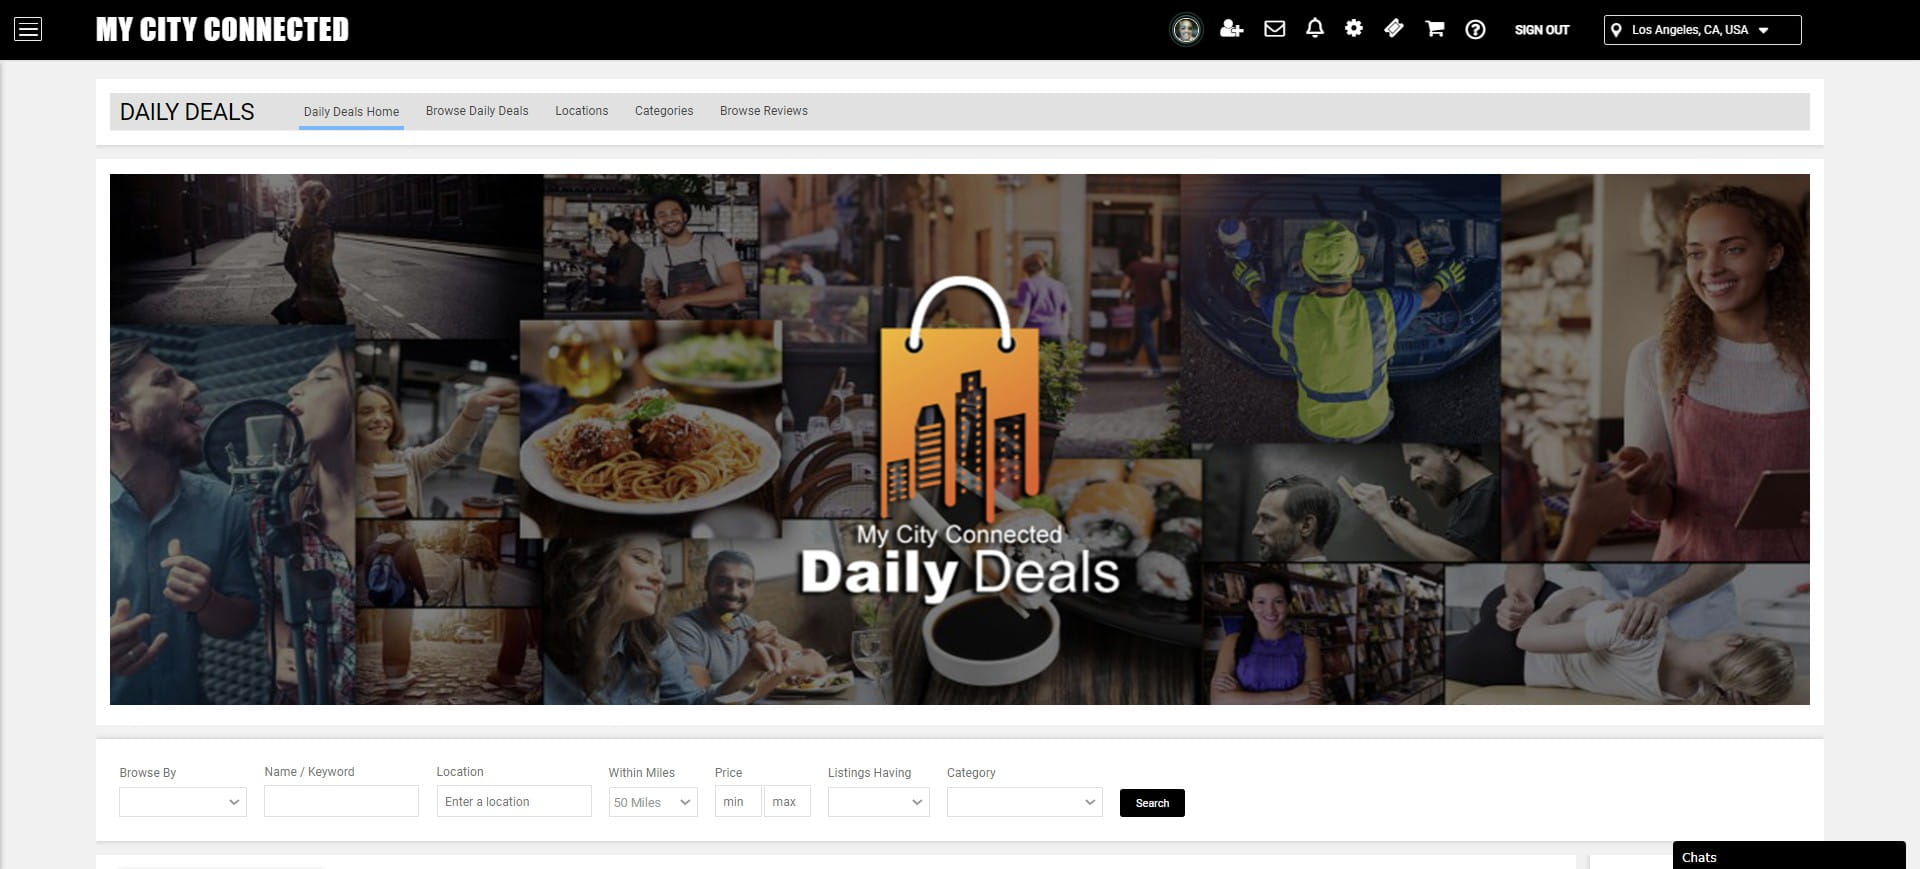 Welcome to the My City Connected Daily Deals section.